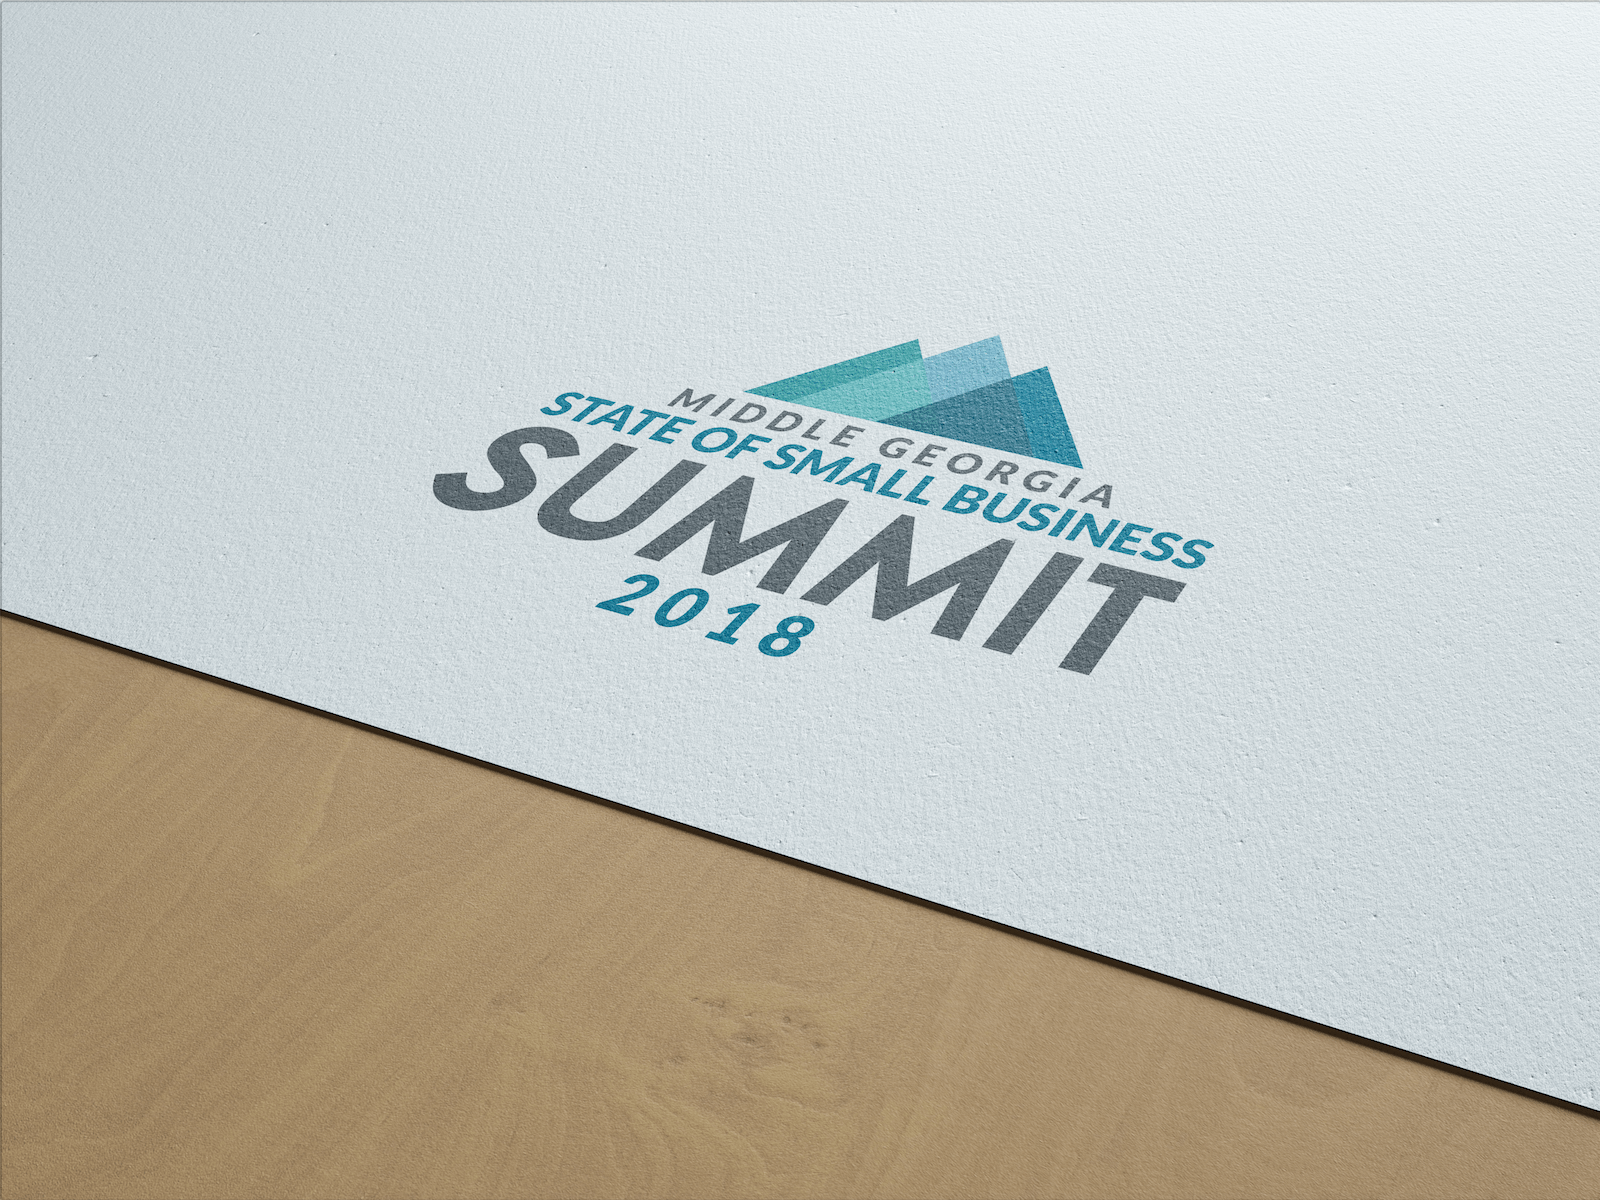 logo design for Middle Georgia Small Business Summit shown on a letterhead